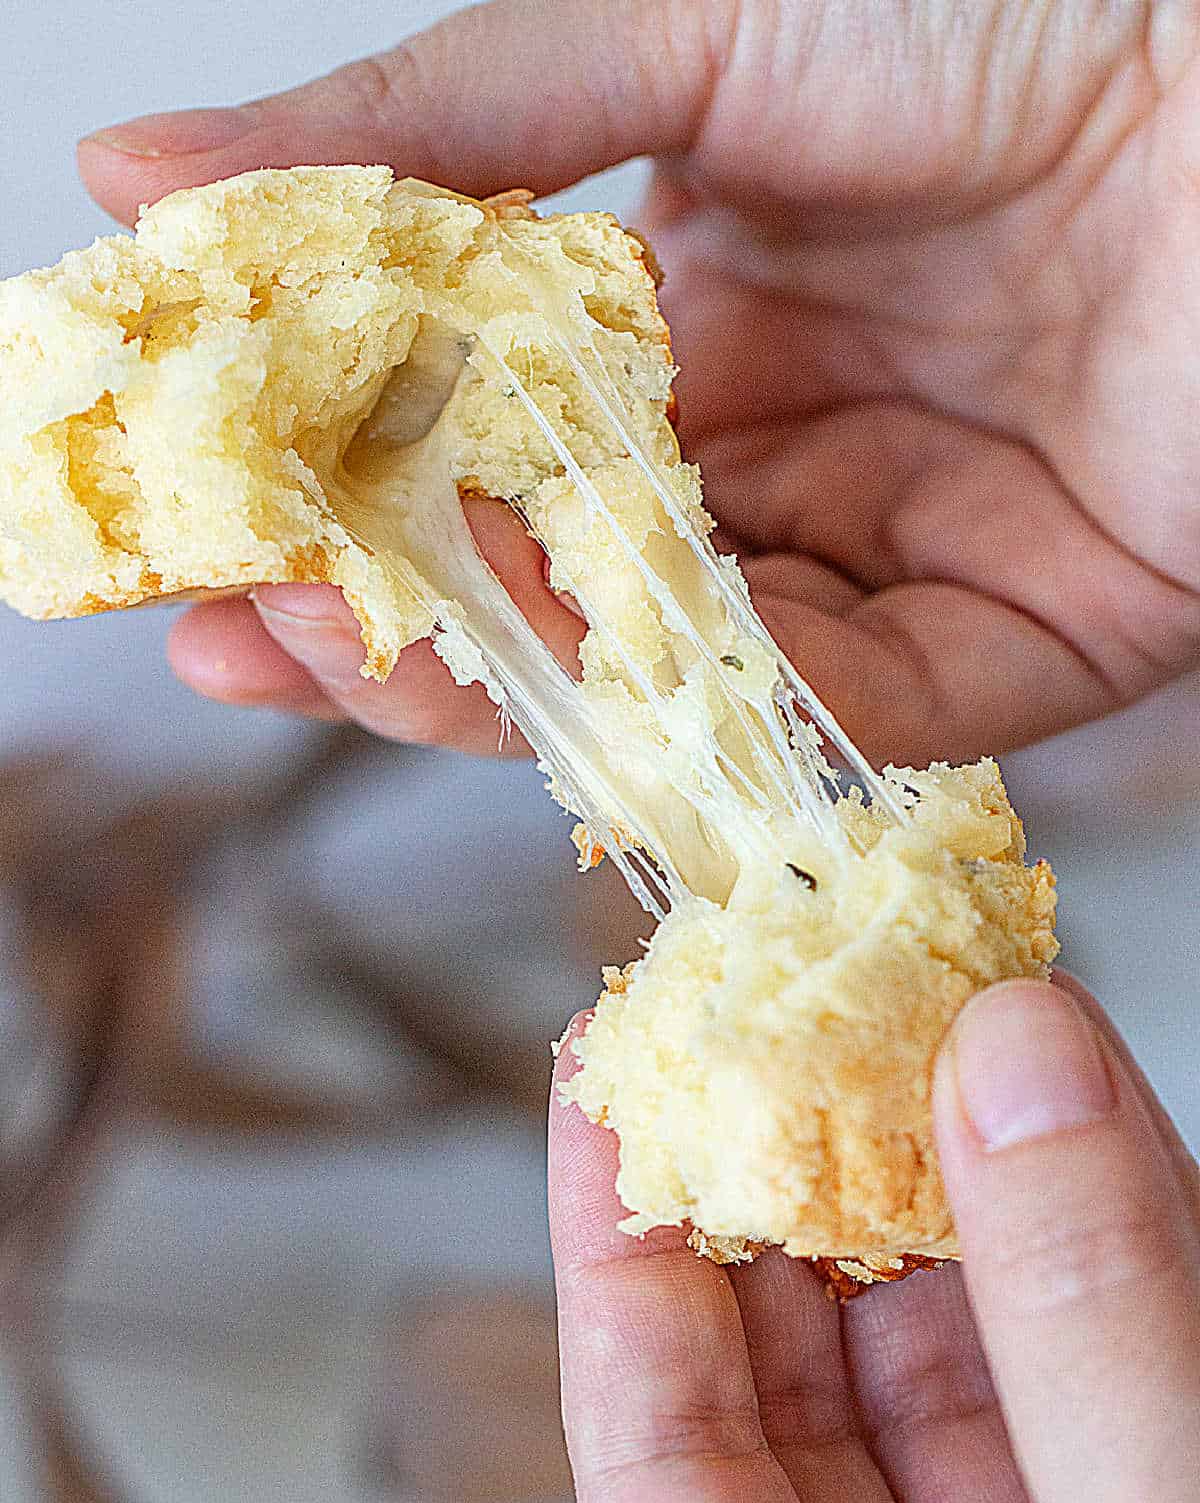 Hands pulling apart scone, cheesy strands.